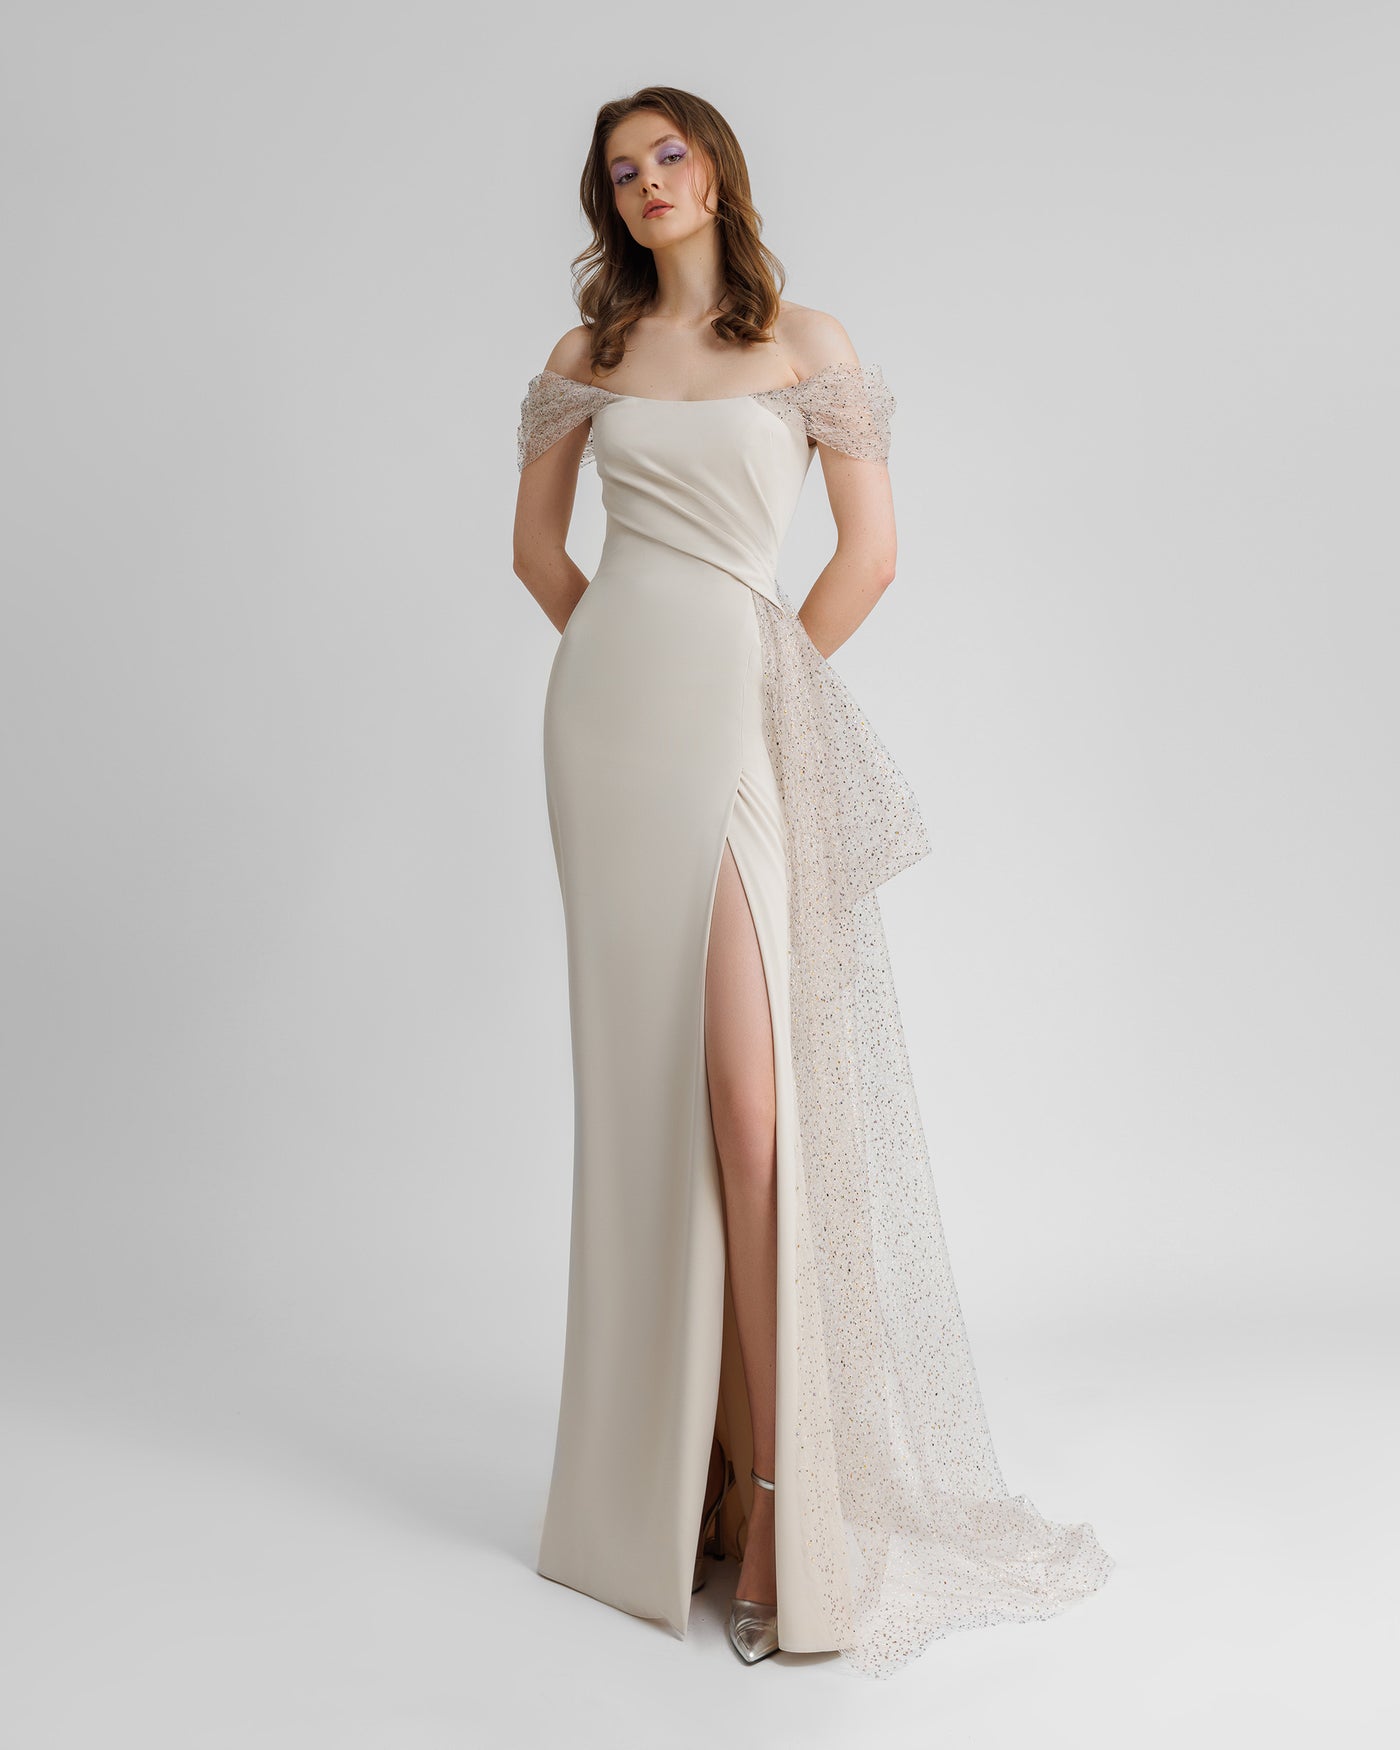 Off-Shoulders Draped Dress With Tail